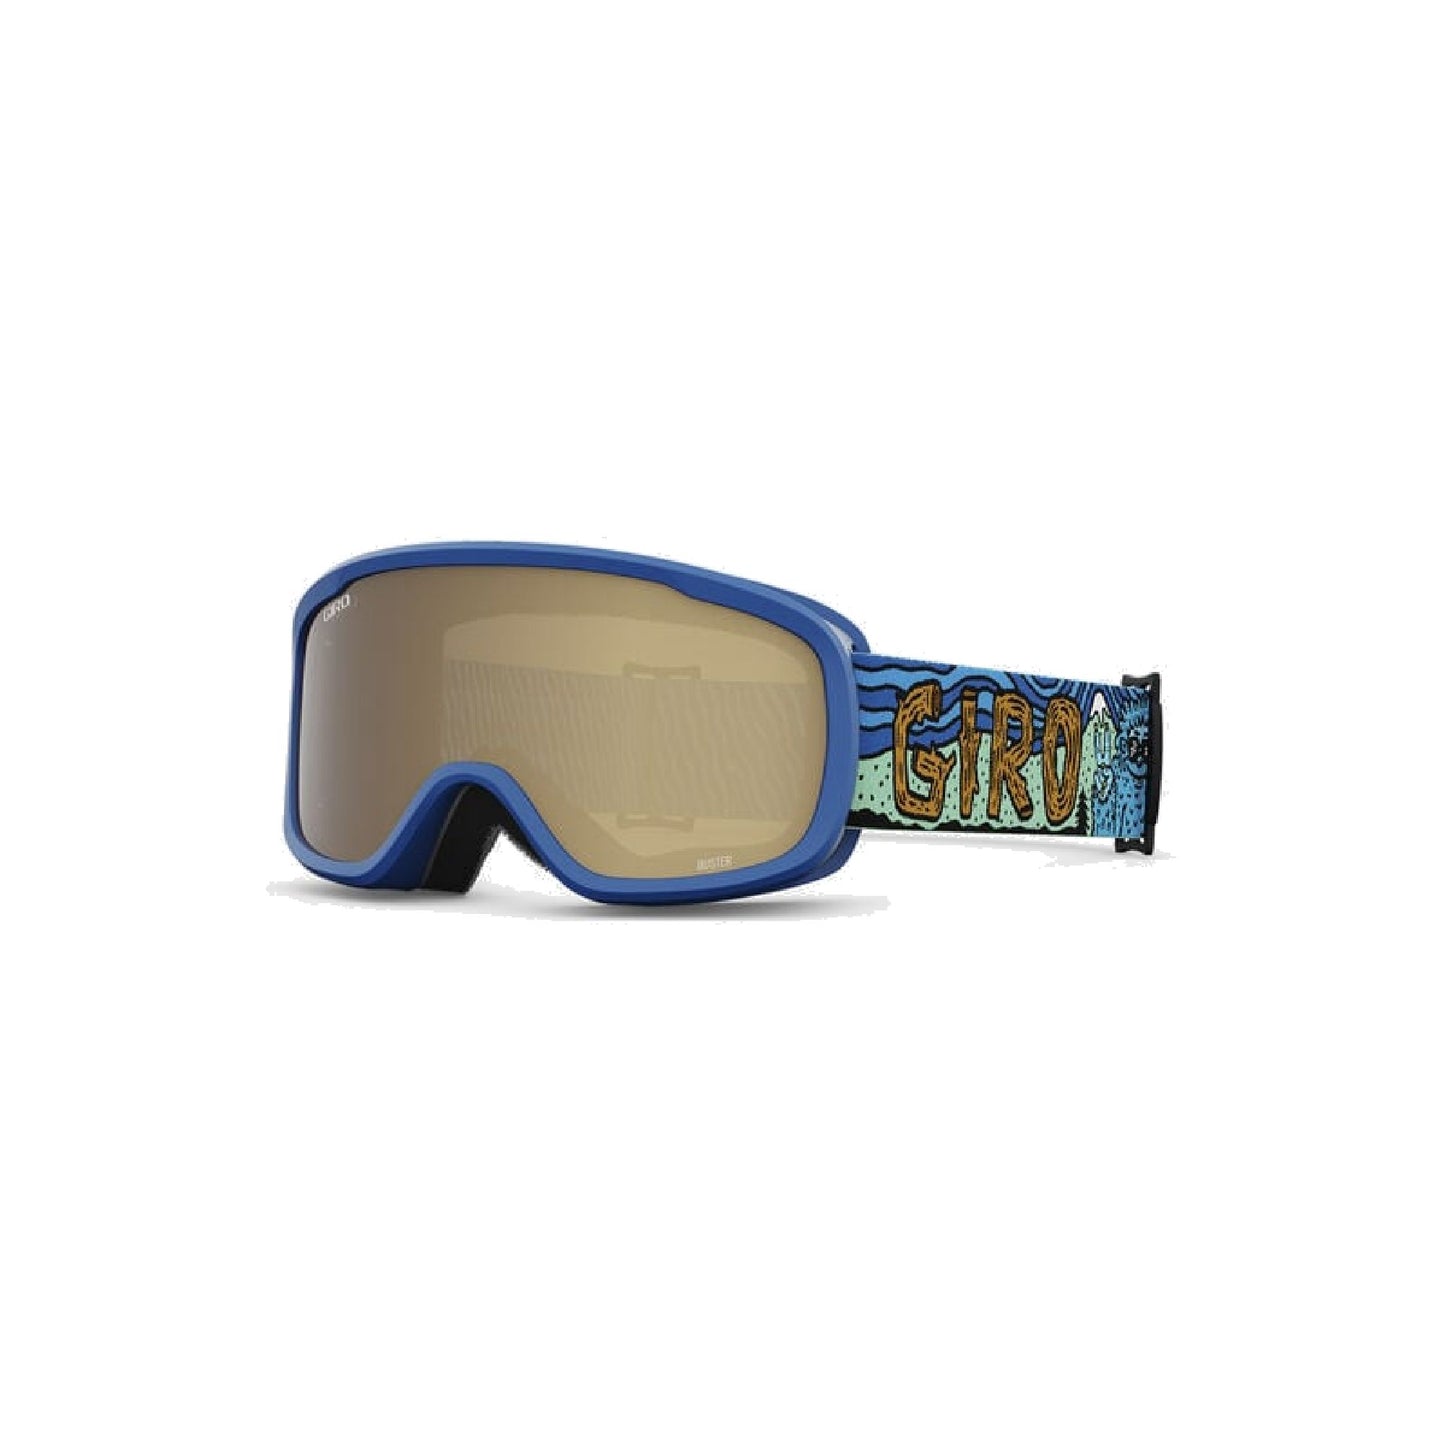 Giro Youth Buster Snow Goggles Blue Shreddy Yeti / Amber Rose Snow Goggles